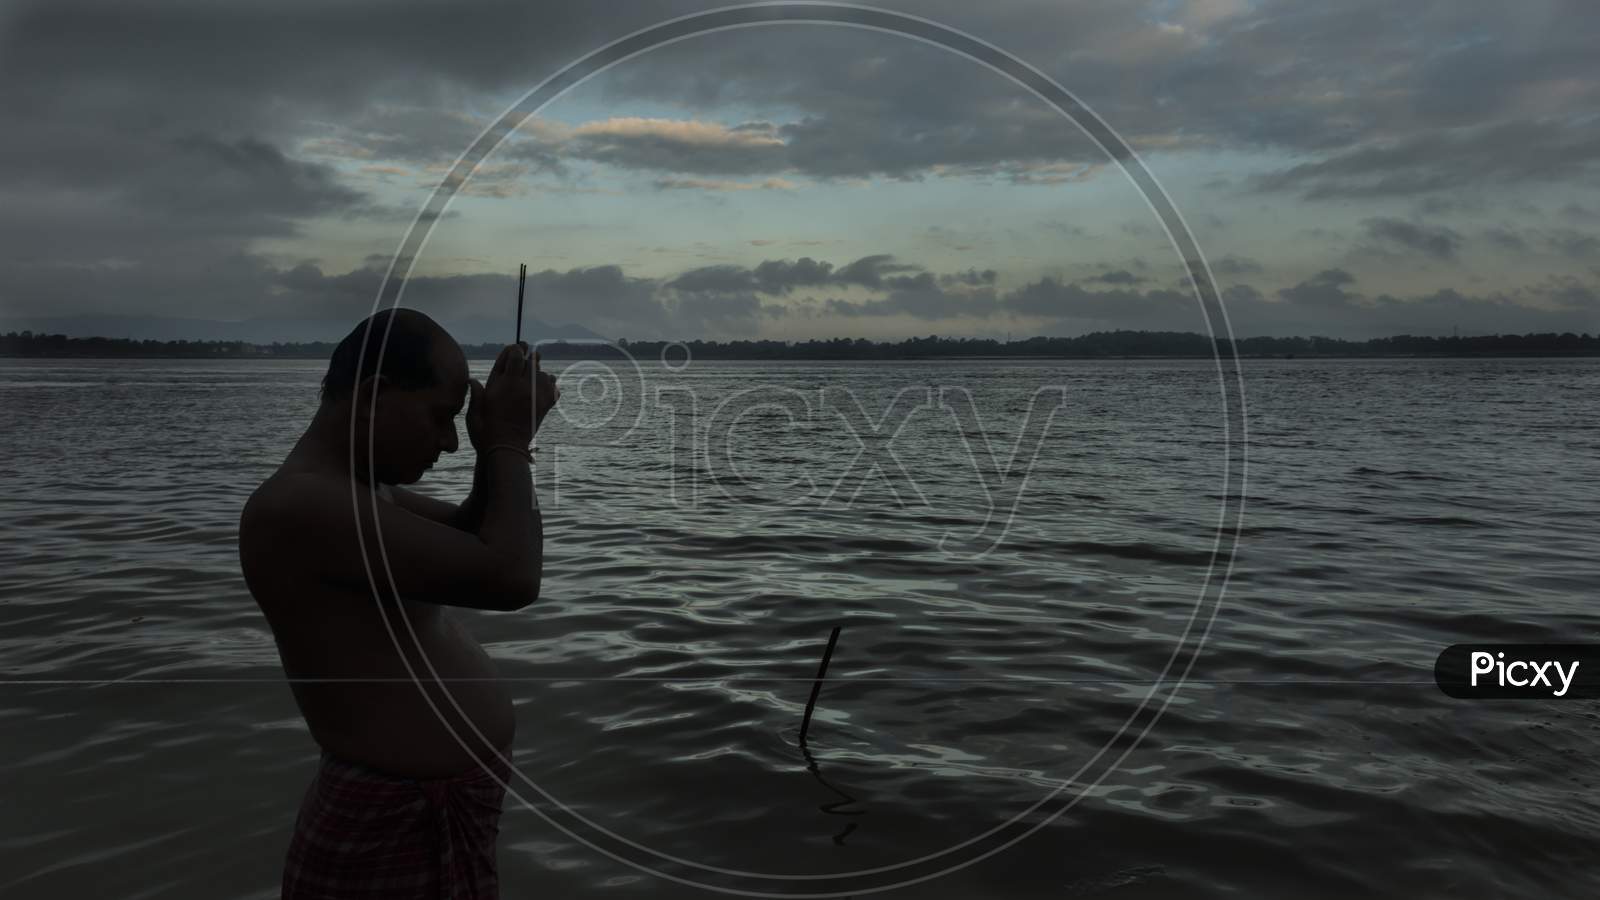 A man prays in Brahmaputra River in the early hours of a day in Guwahati, Assam.